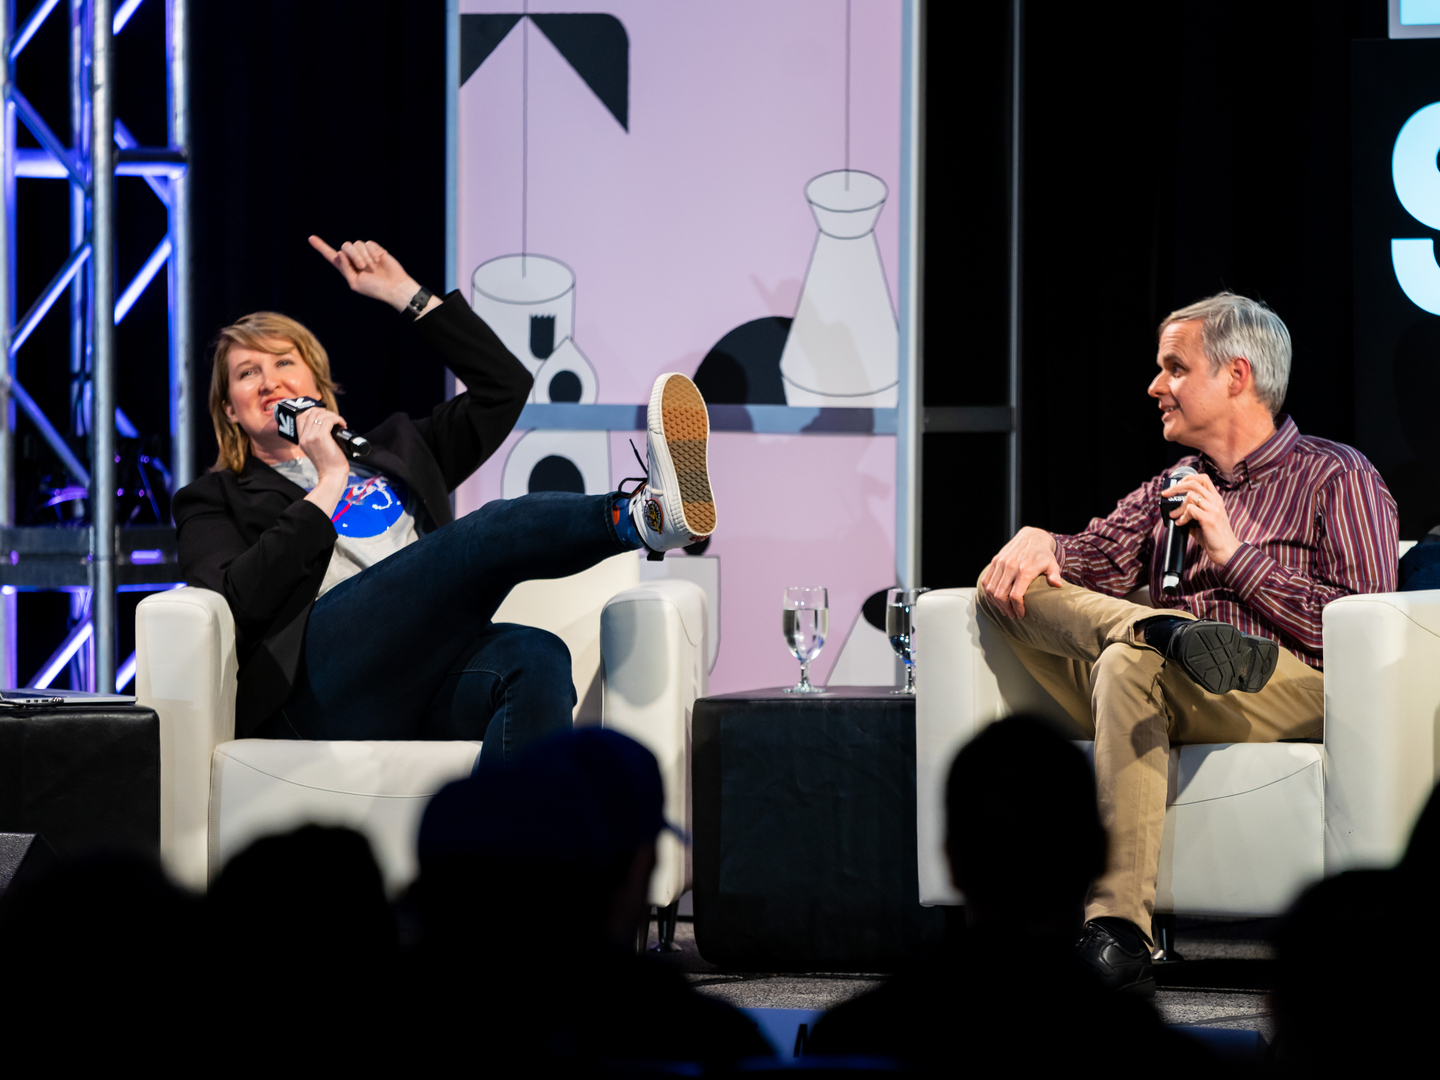 Stephanie Smith & Bert Ulrich at the Shooting Stars: How NASA Works w/ Film & TV Featured Session – Photo by John Feinberg